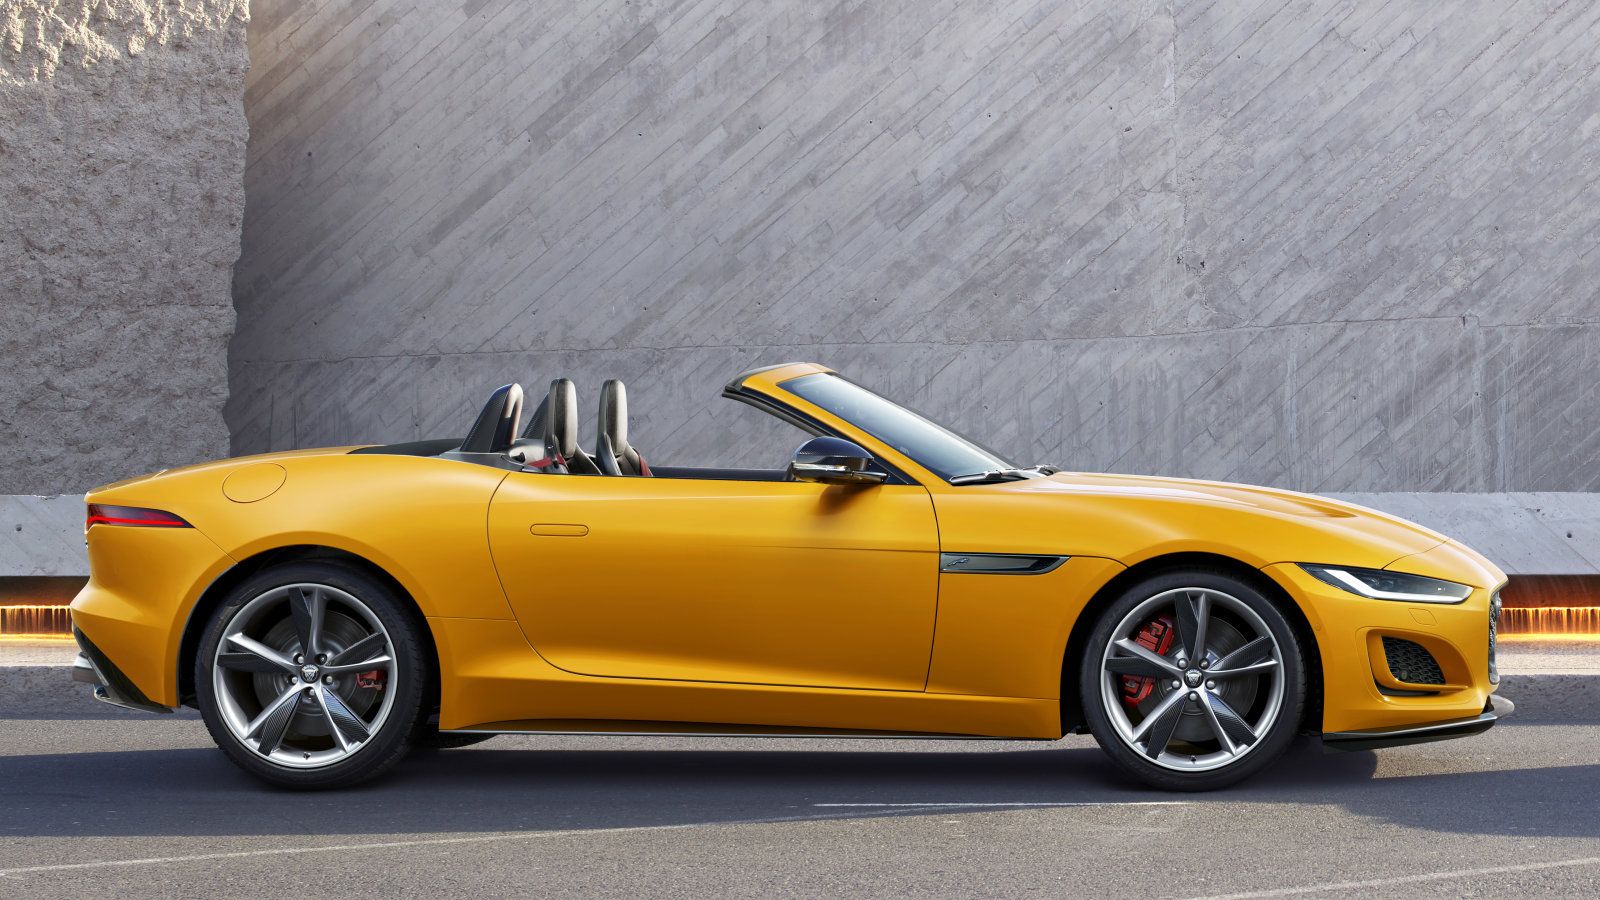 Jaguar F Type Sees The Light With Styling, Handling Updates